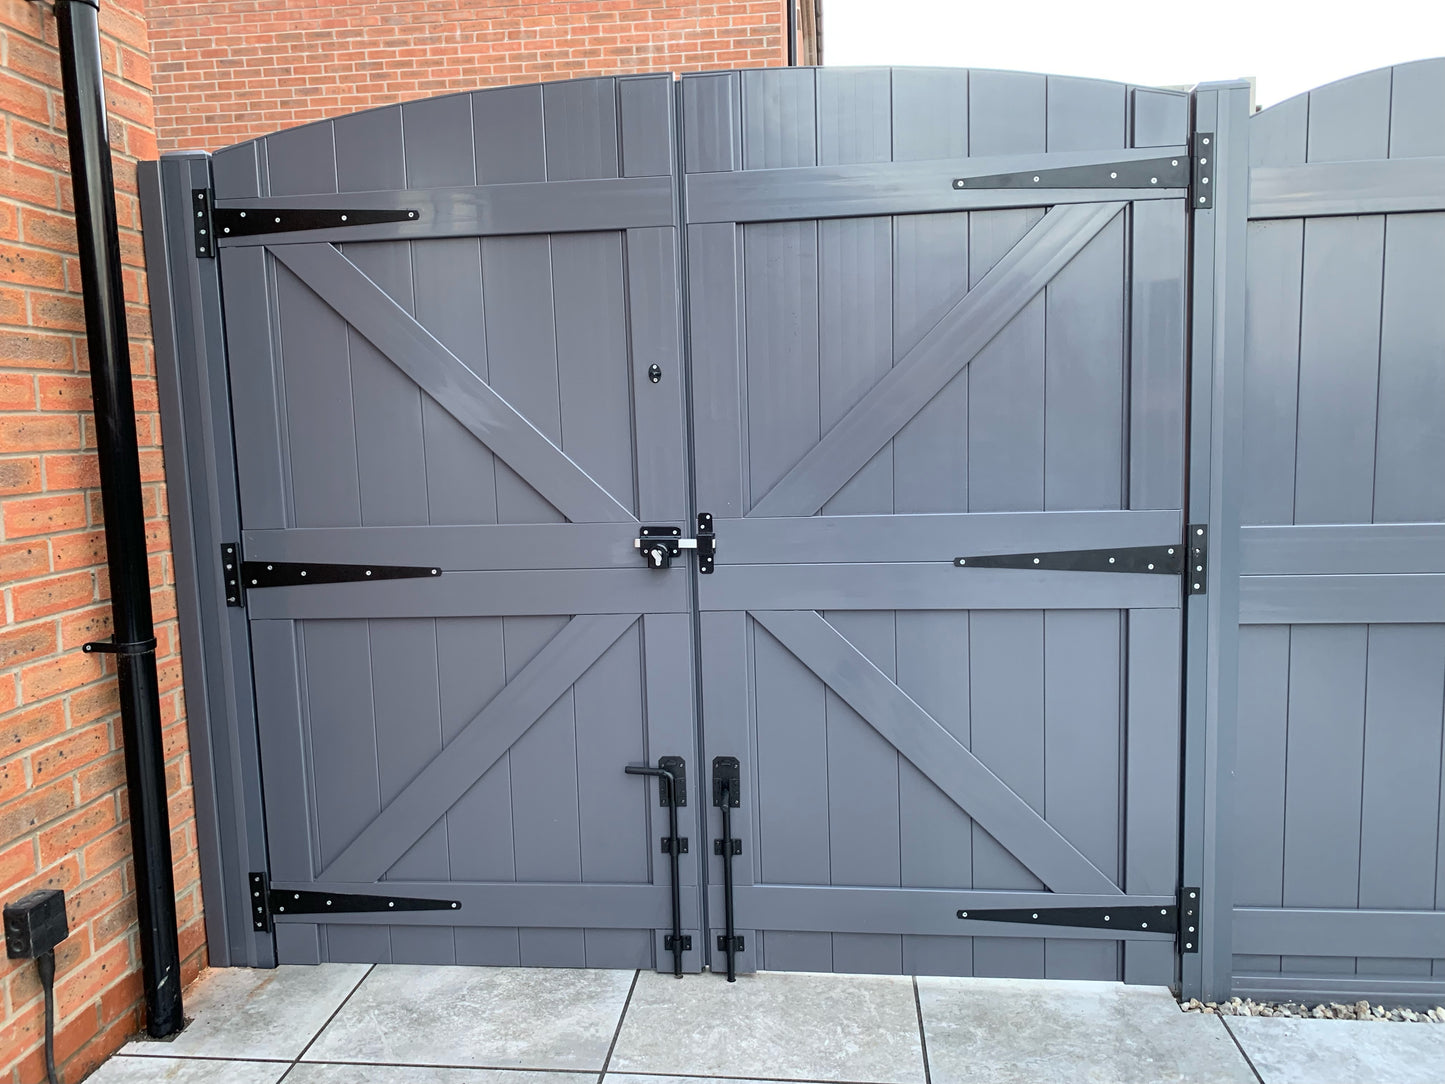 PVC Double Gates for Driveways and Gardens | W: 1500 - 2000mm, H: 1800mm | Flat Top